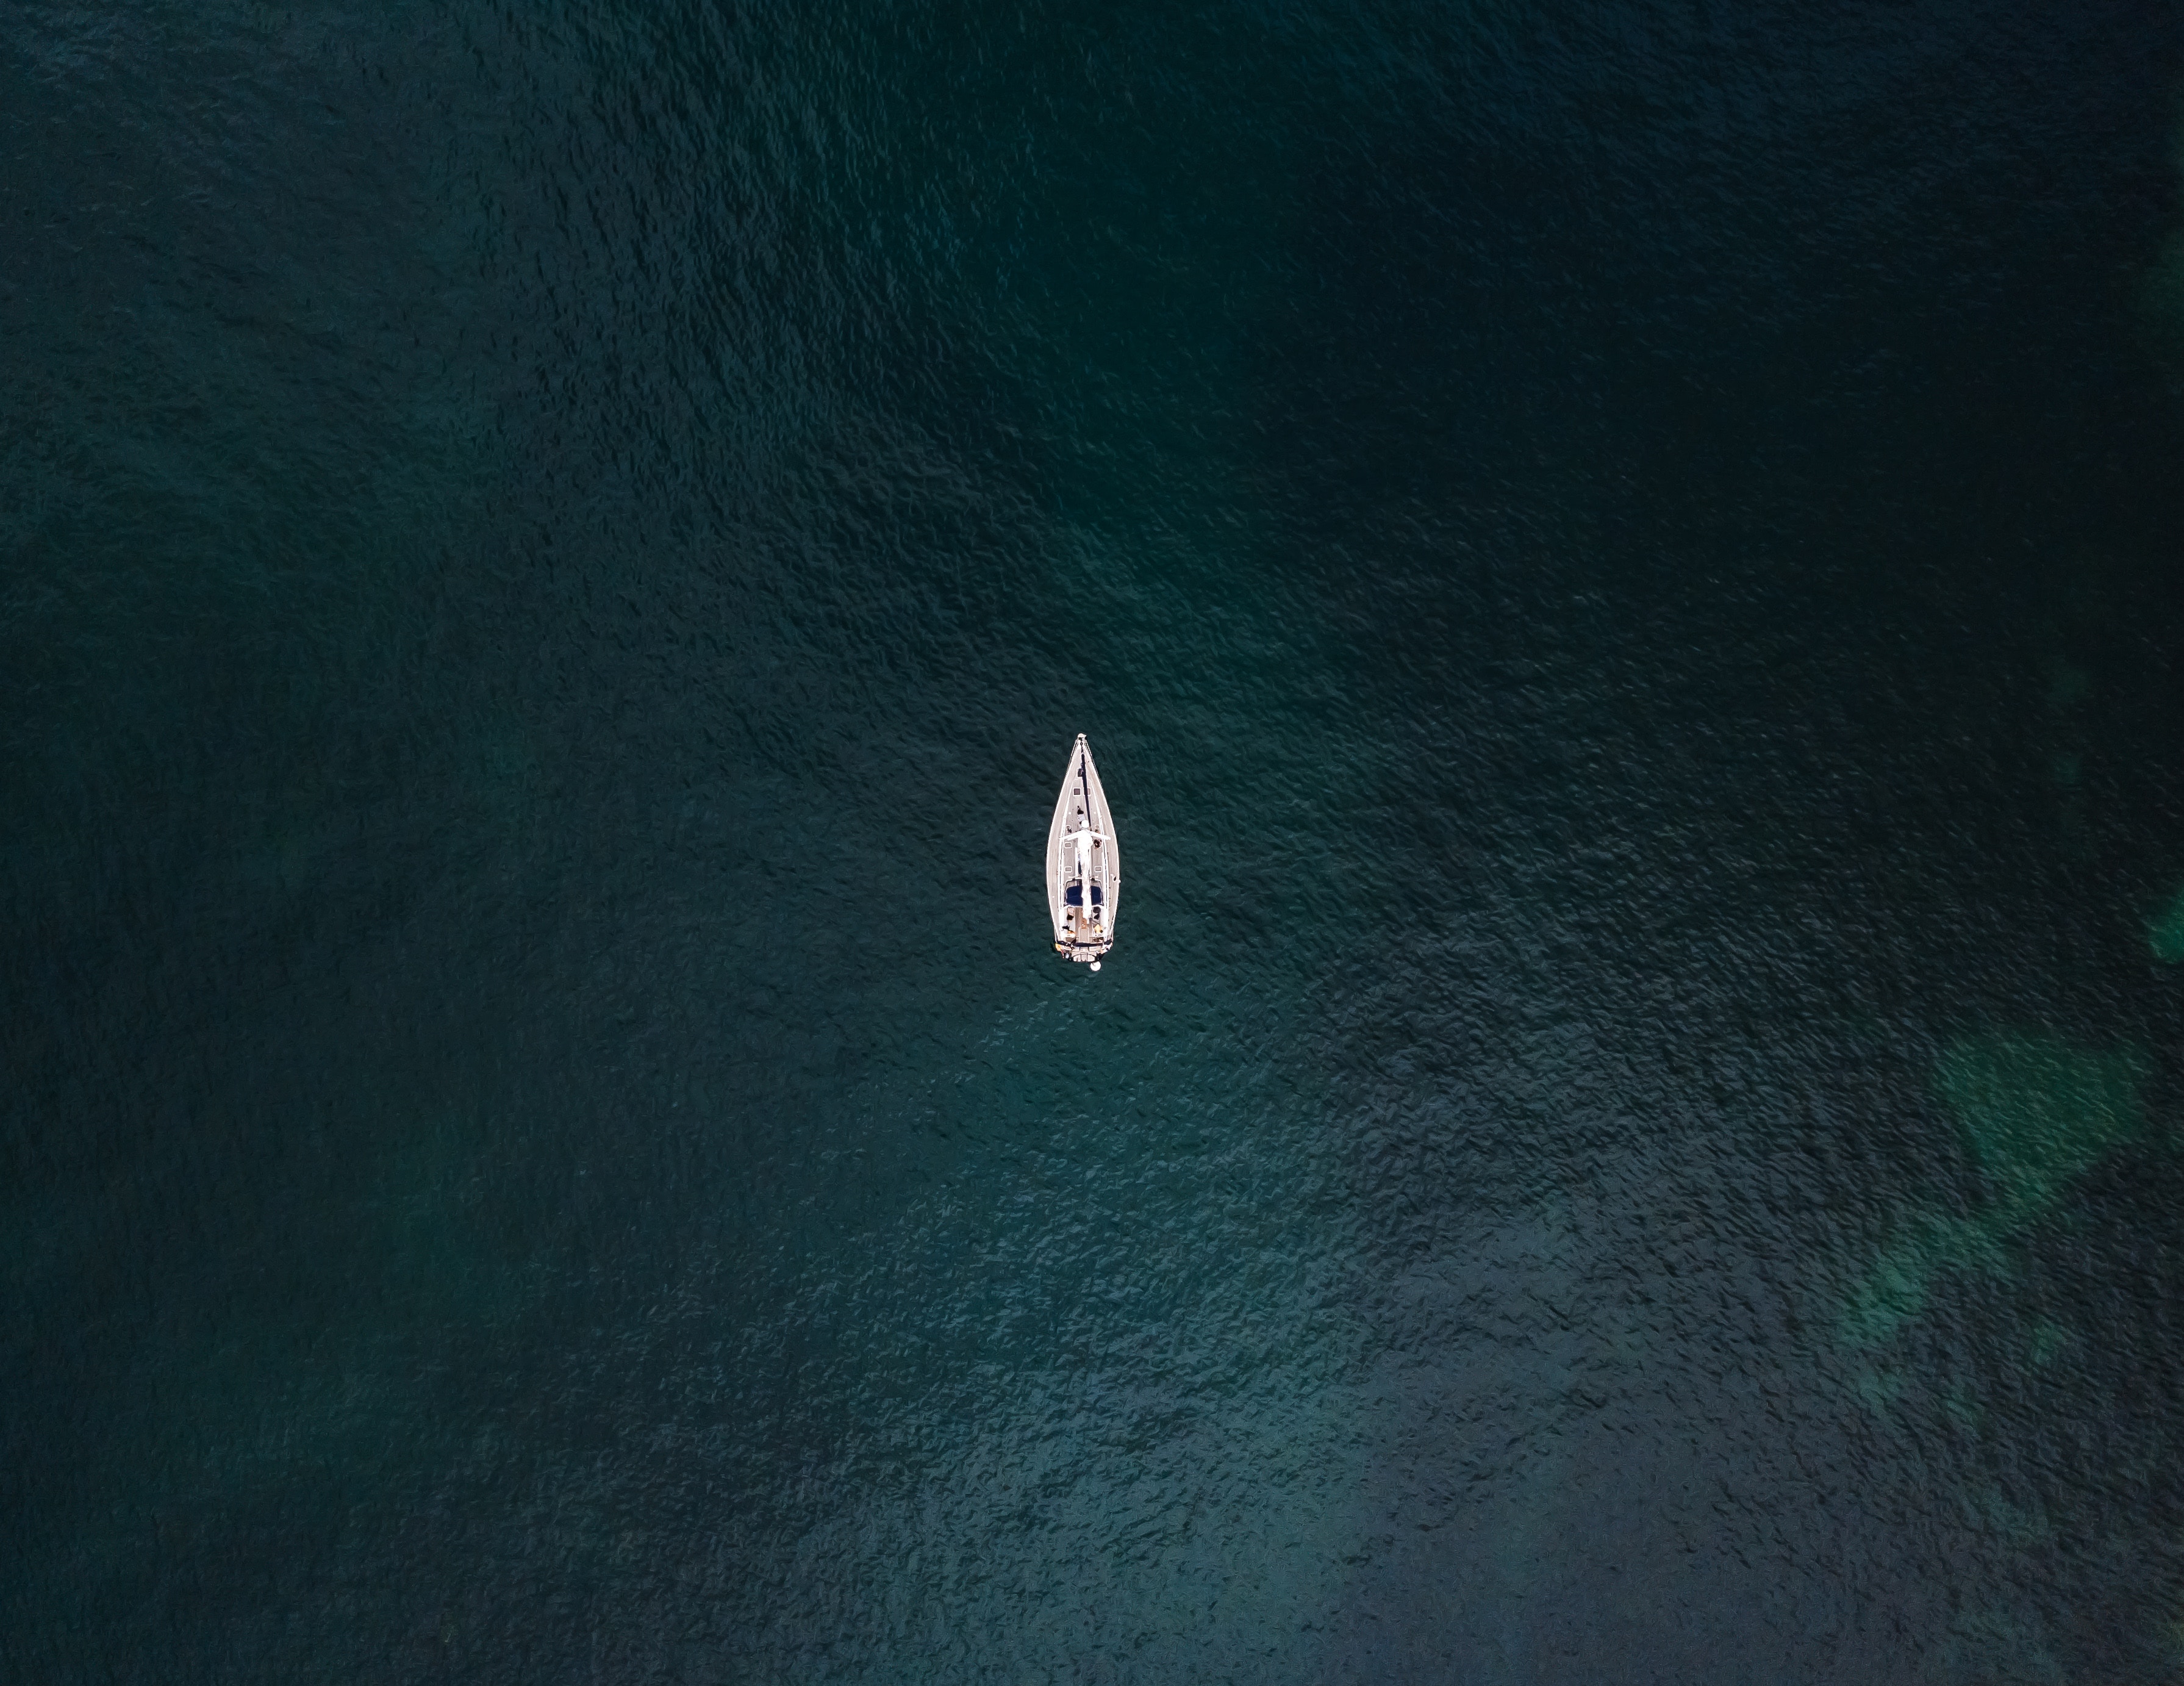 wallpapers surface, yacht, water, sea, view from above, miscellanea, miscellaneous